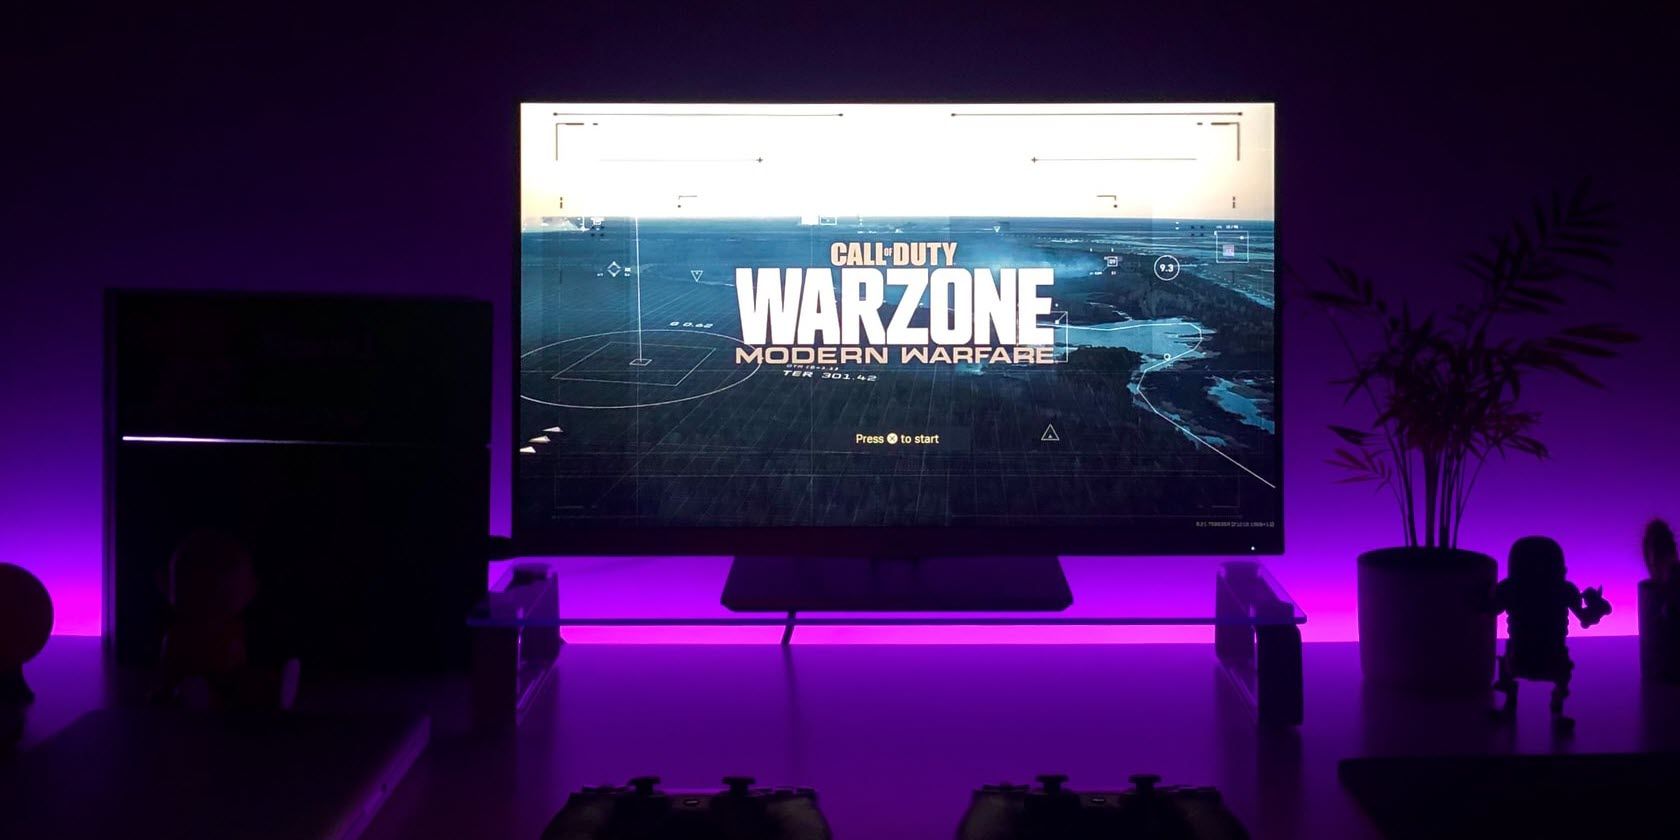 Call of Duty Warzone on computer screen